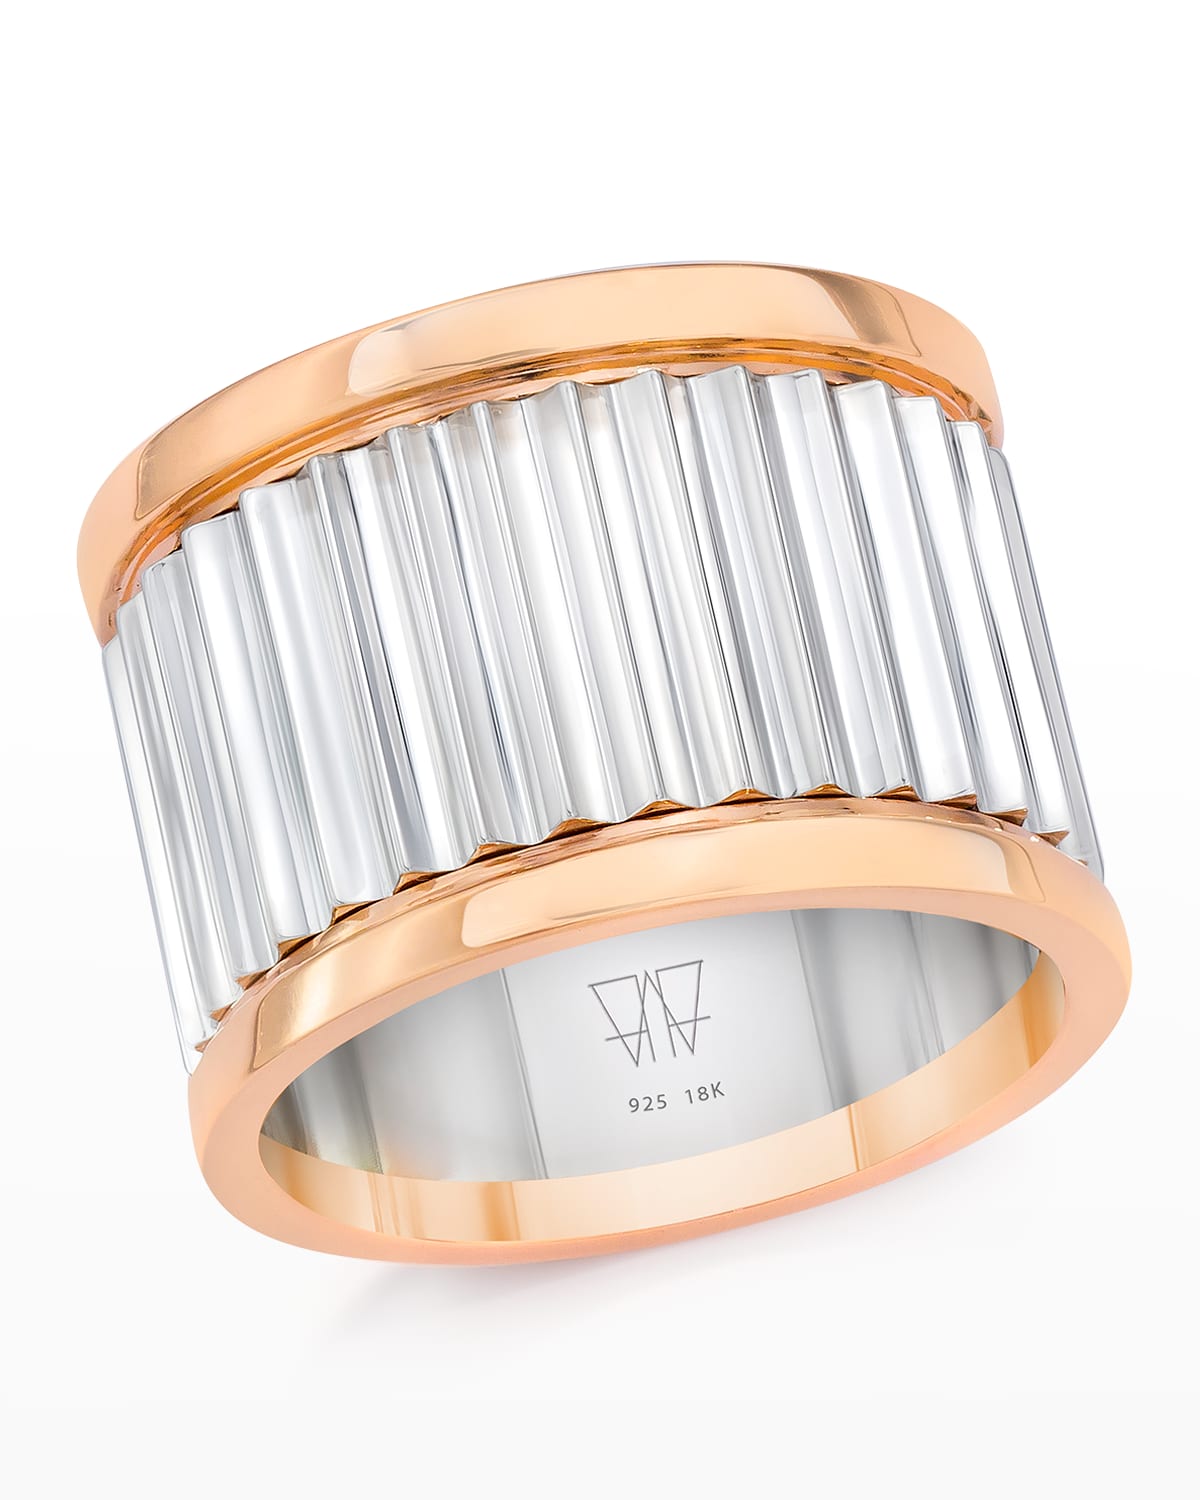 Clive Sterling Silver Wide Fluted Band Ring with Rose Gold Rails